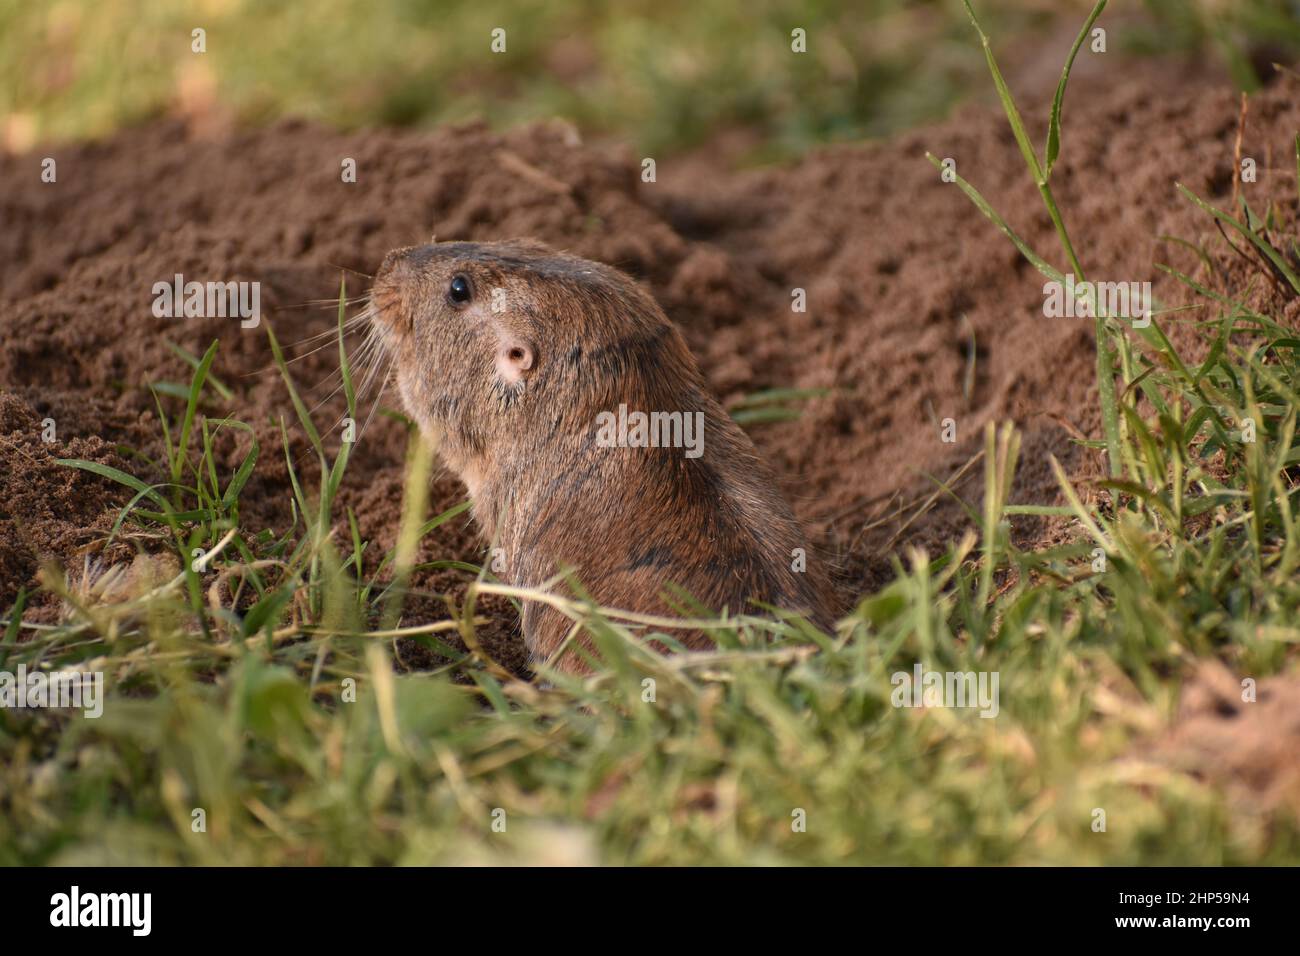 Closeup shot of a cute tuco-tuco animal looking out of a hole Stock Photo